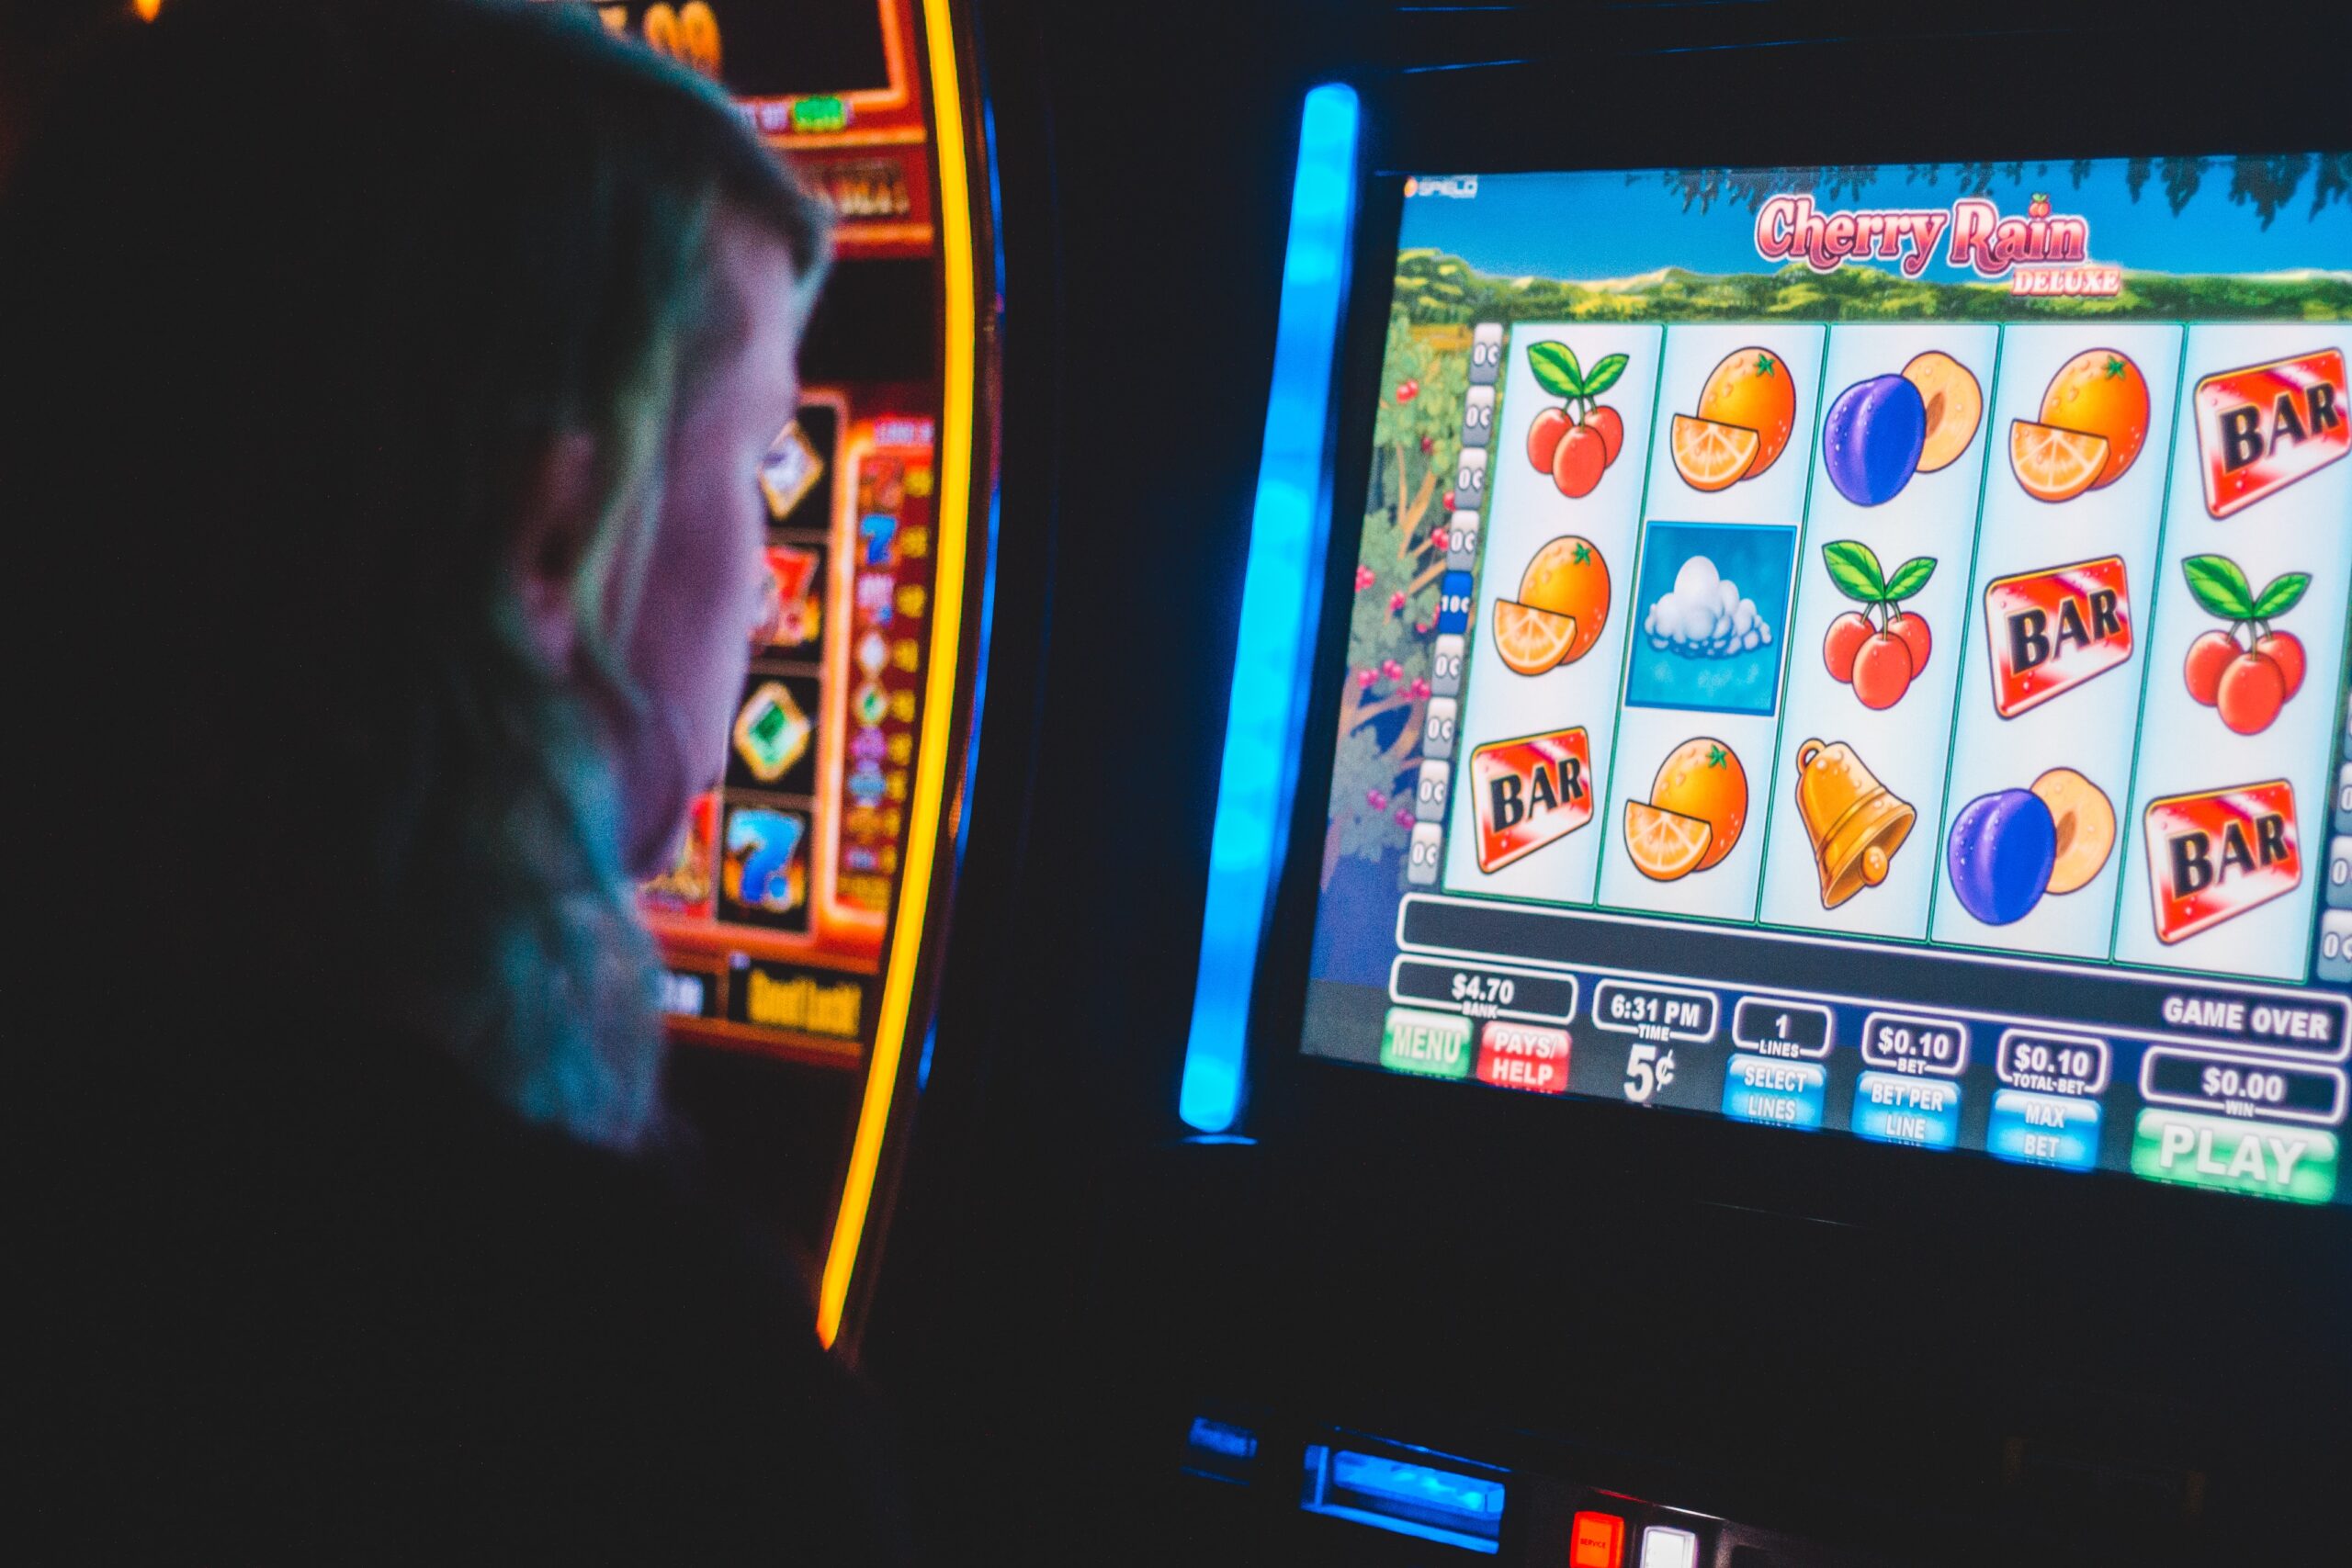 Penn Entertainment and responsible gambling practices